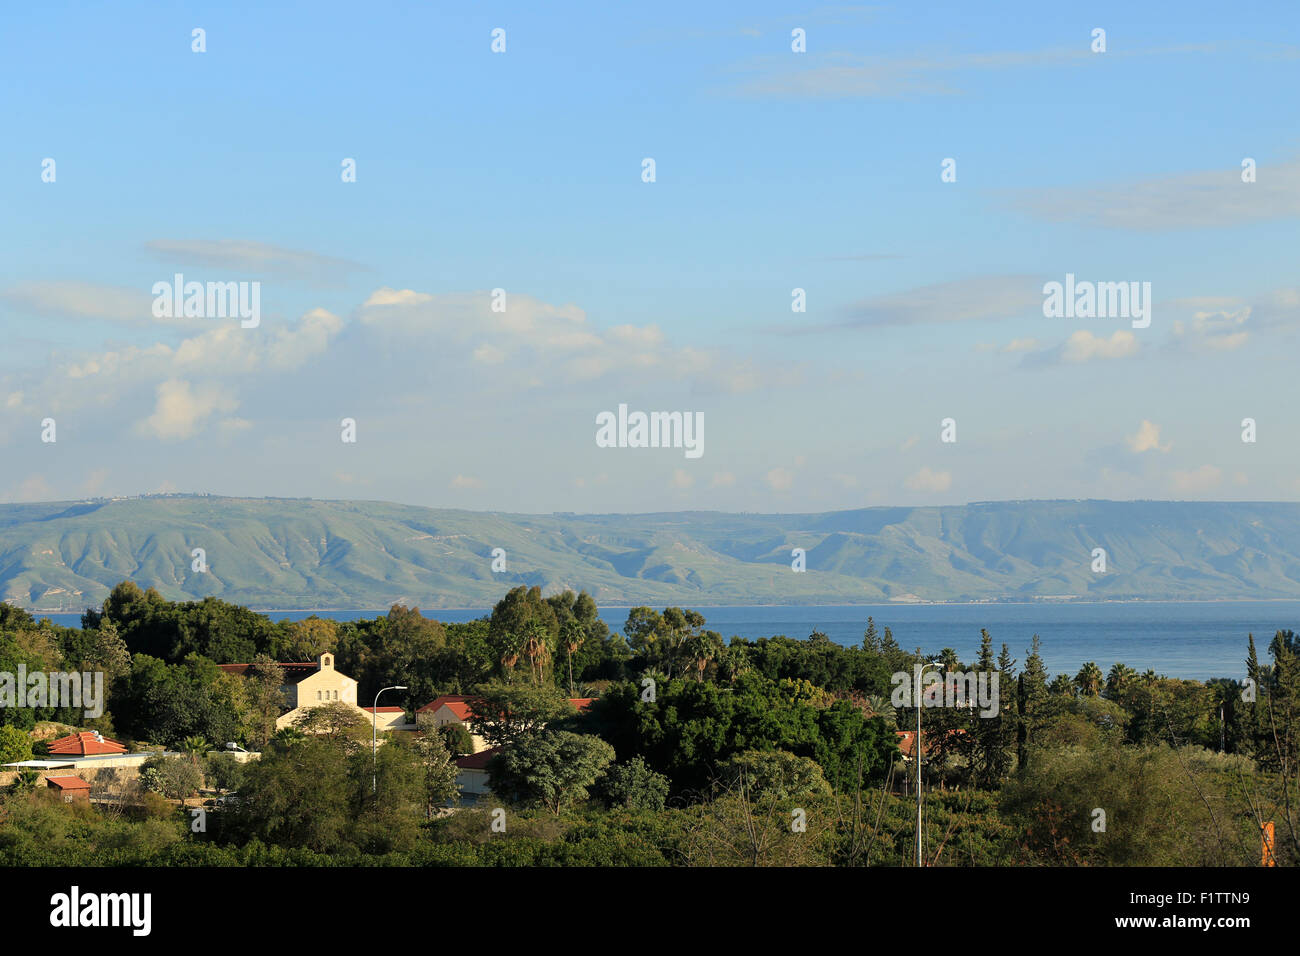 Israel, Sea of Galilee, the Church of the Multiplication of the Loaves and Fishes in Tabgha Stock Photo